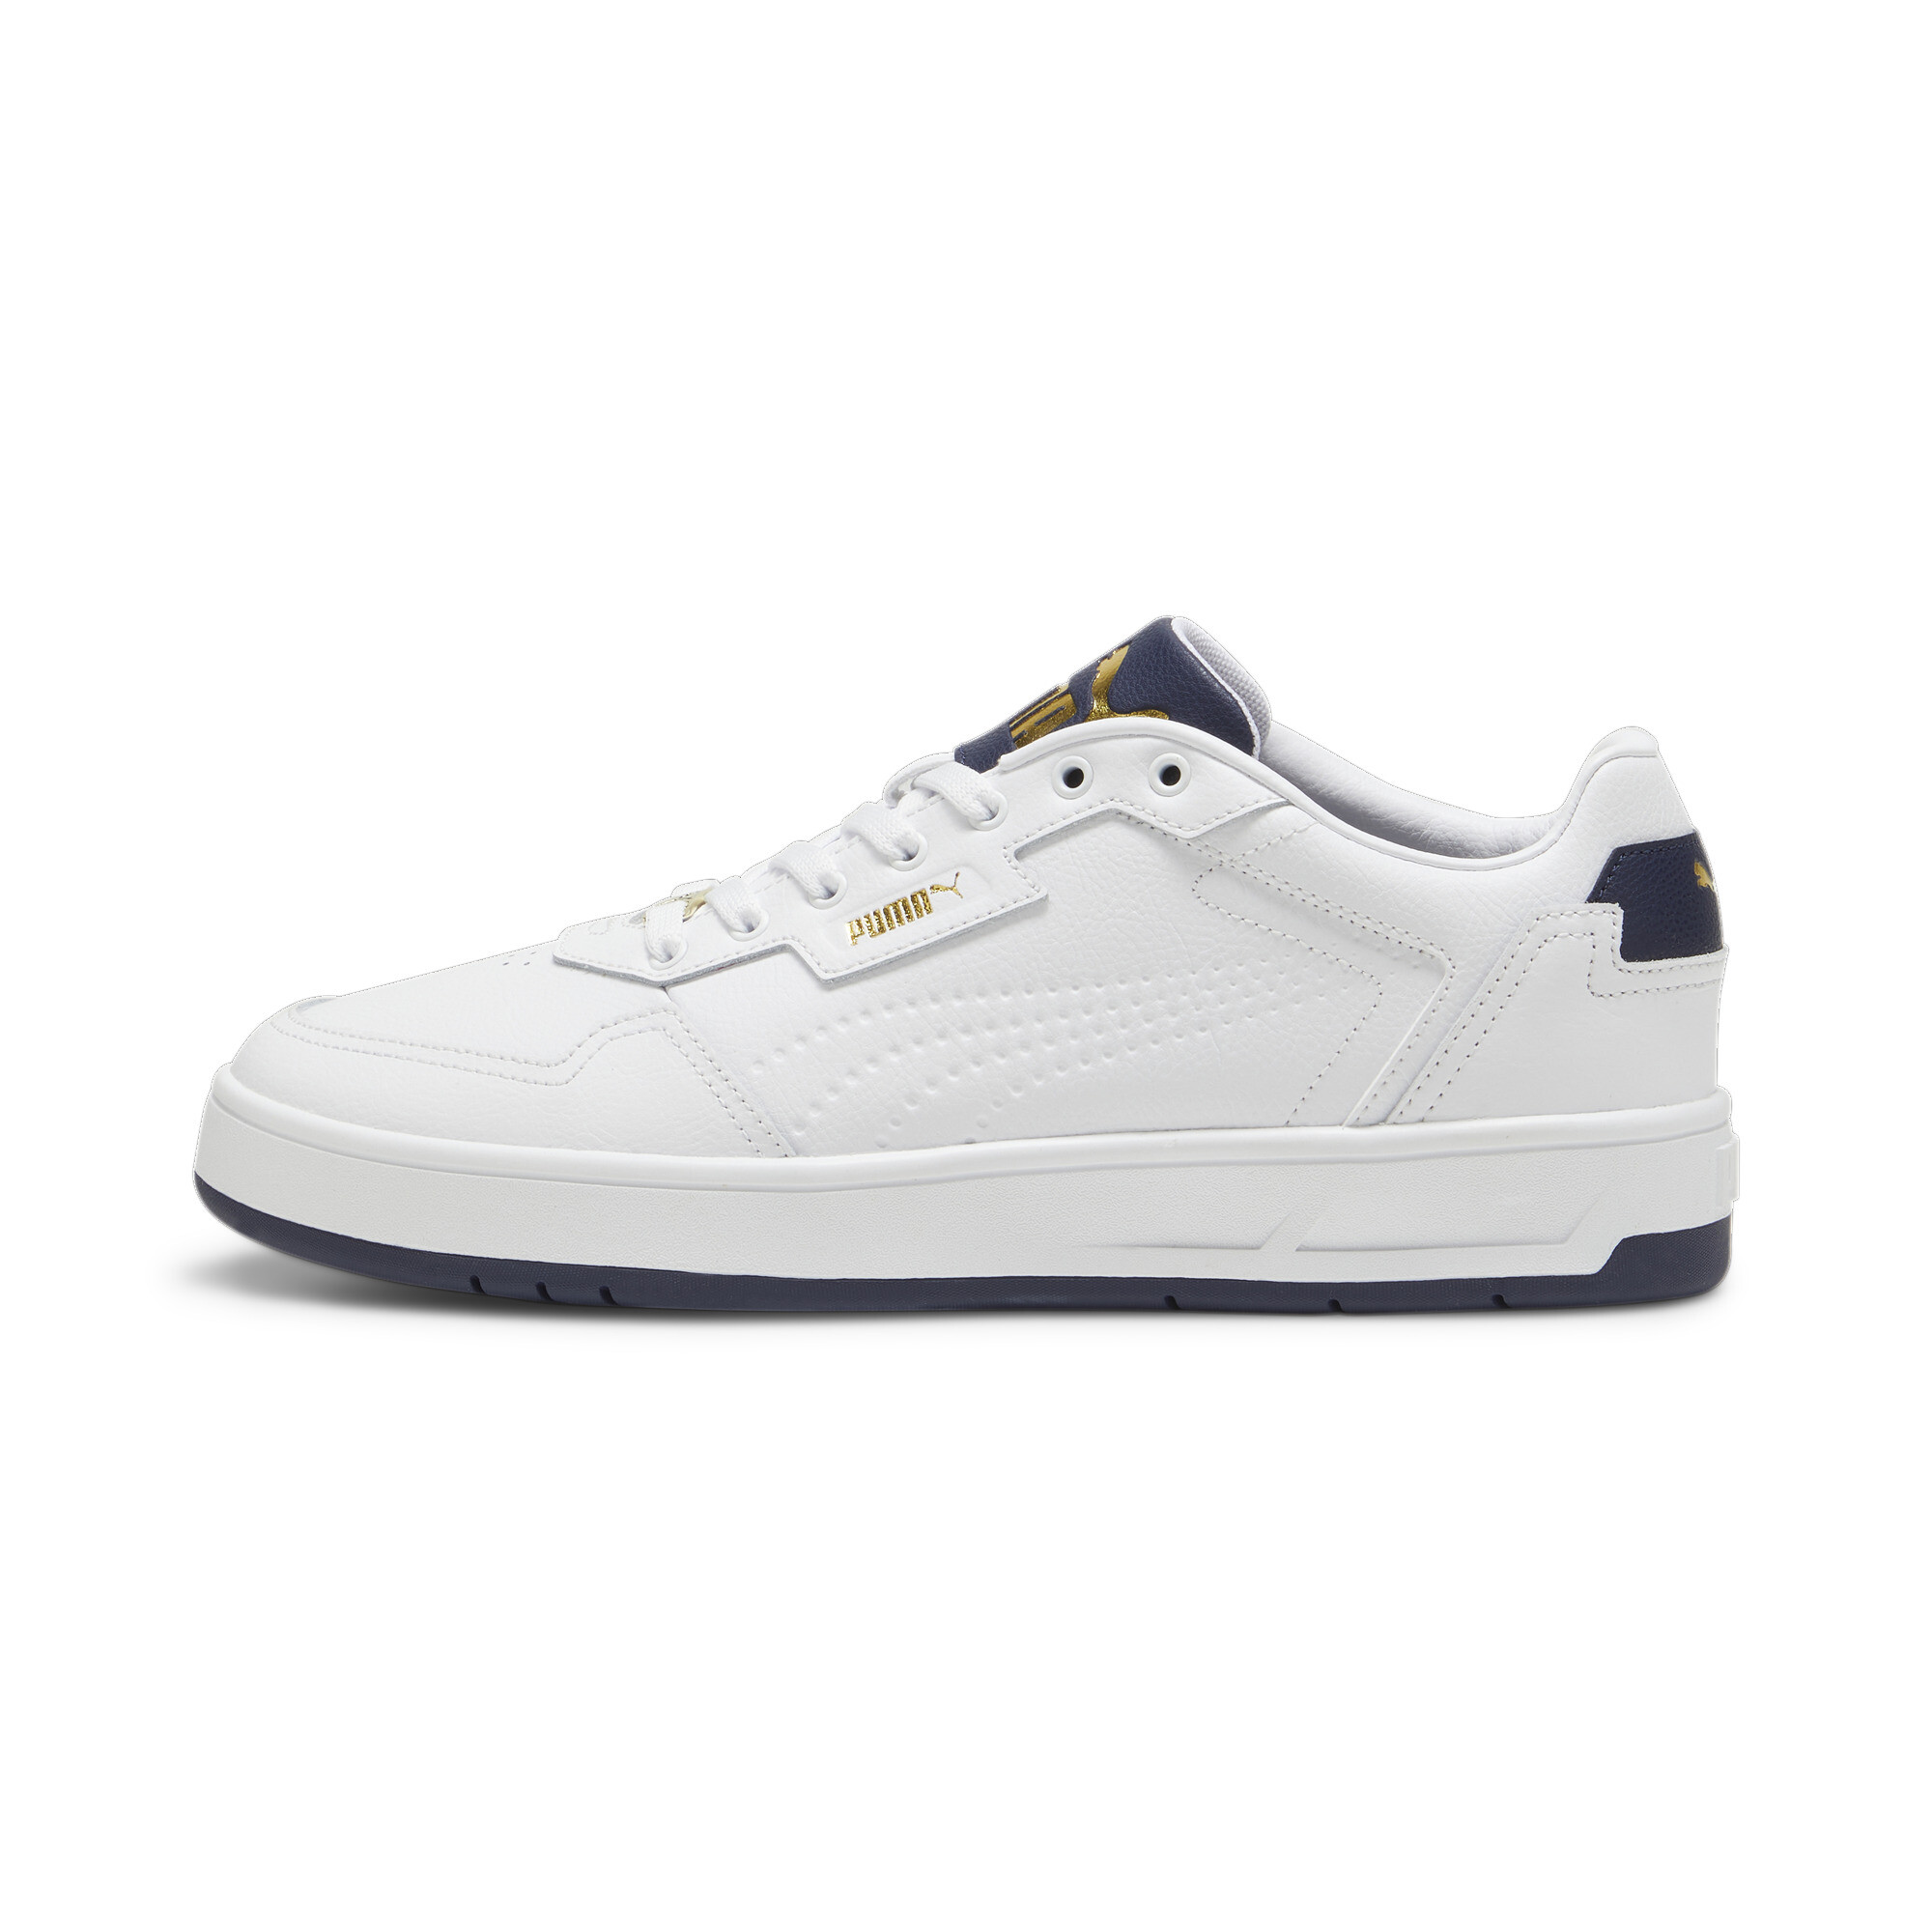 Puma Court Classic Lux Sneakers, White, Size 42.5, Shoes